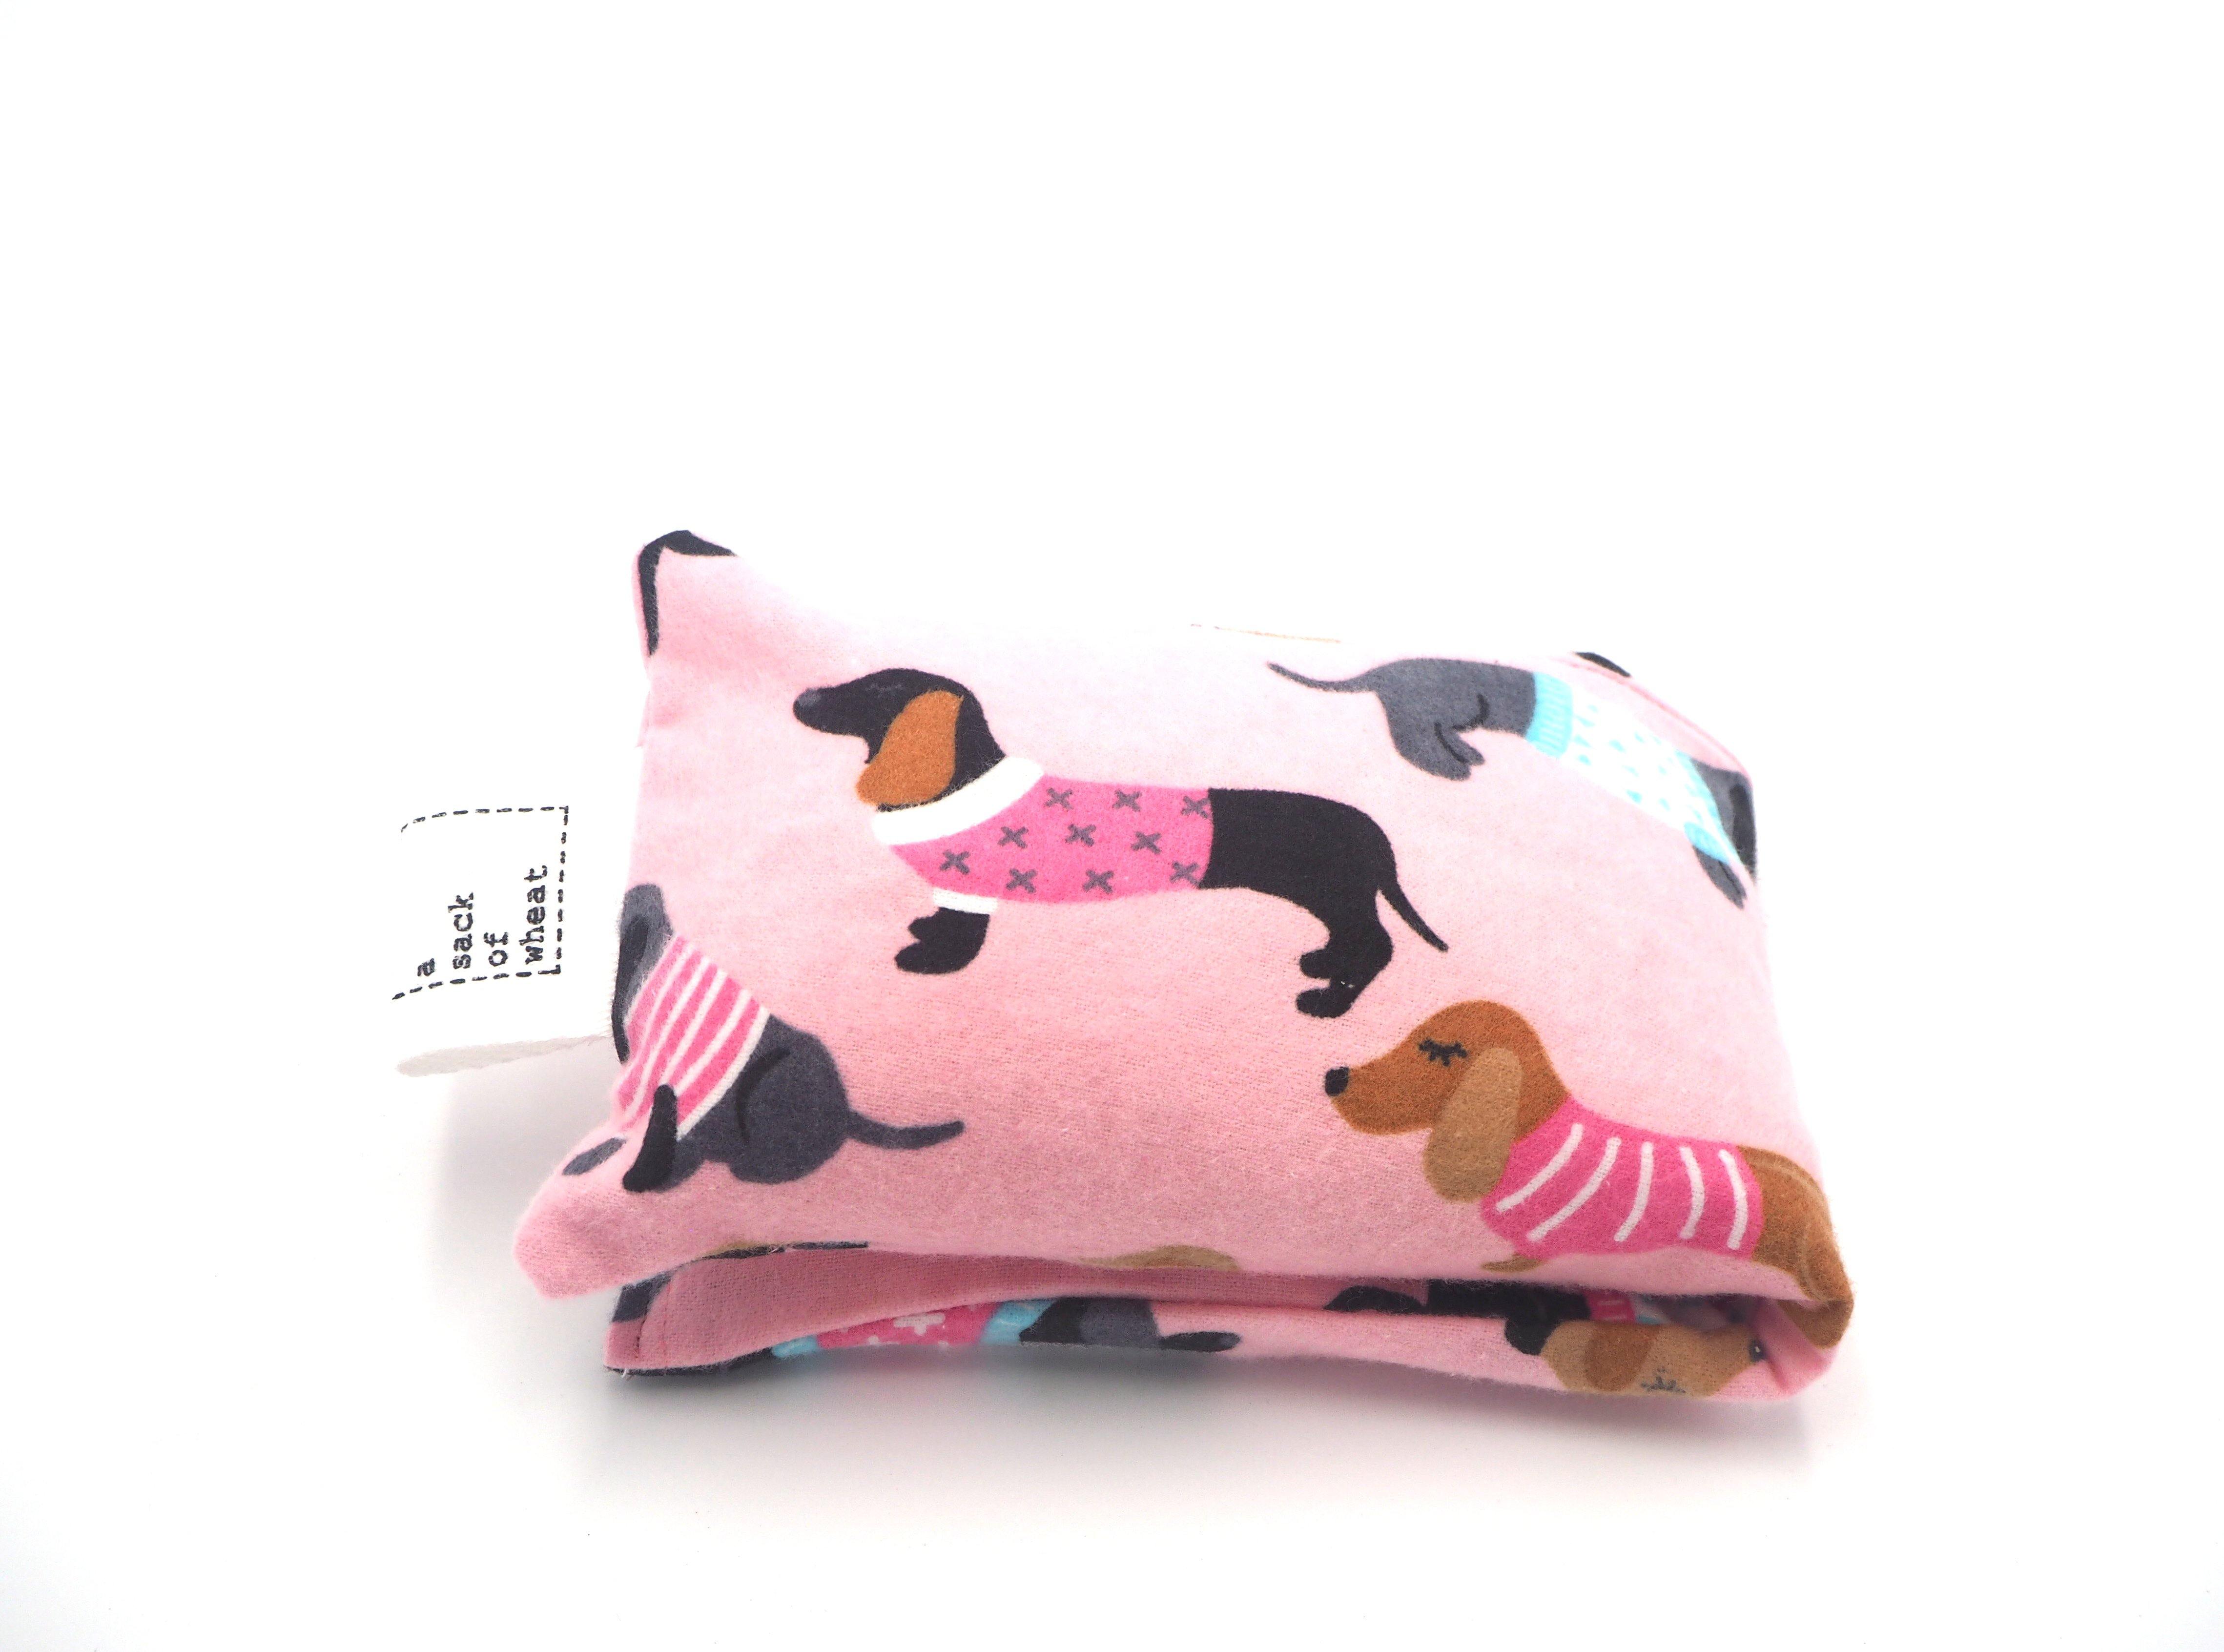 Folded view of A Sack Of Wheat, featuring dogs in cute jackets on soft pink flannelette 100% cotton fabric